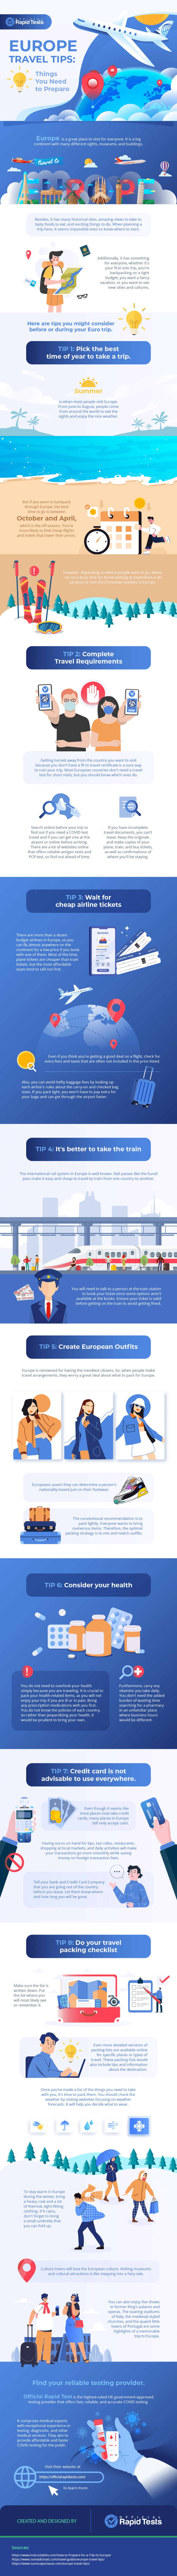 Europe-Travel-Tips-Things-You-Need-Prepare-fitl-certificate-covid-antigen-pcr-test-infographic